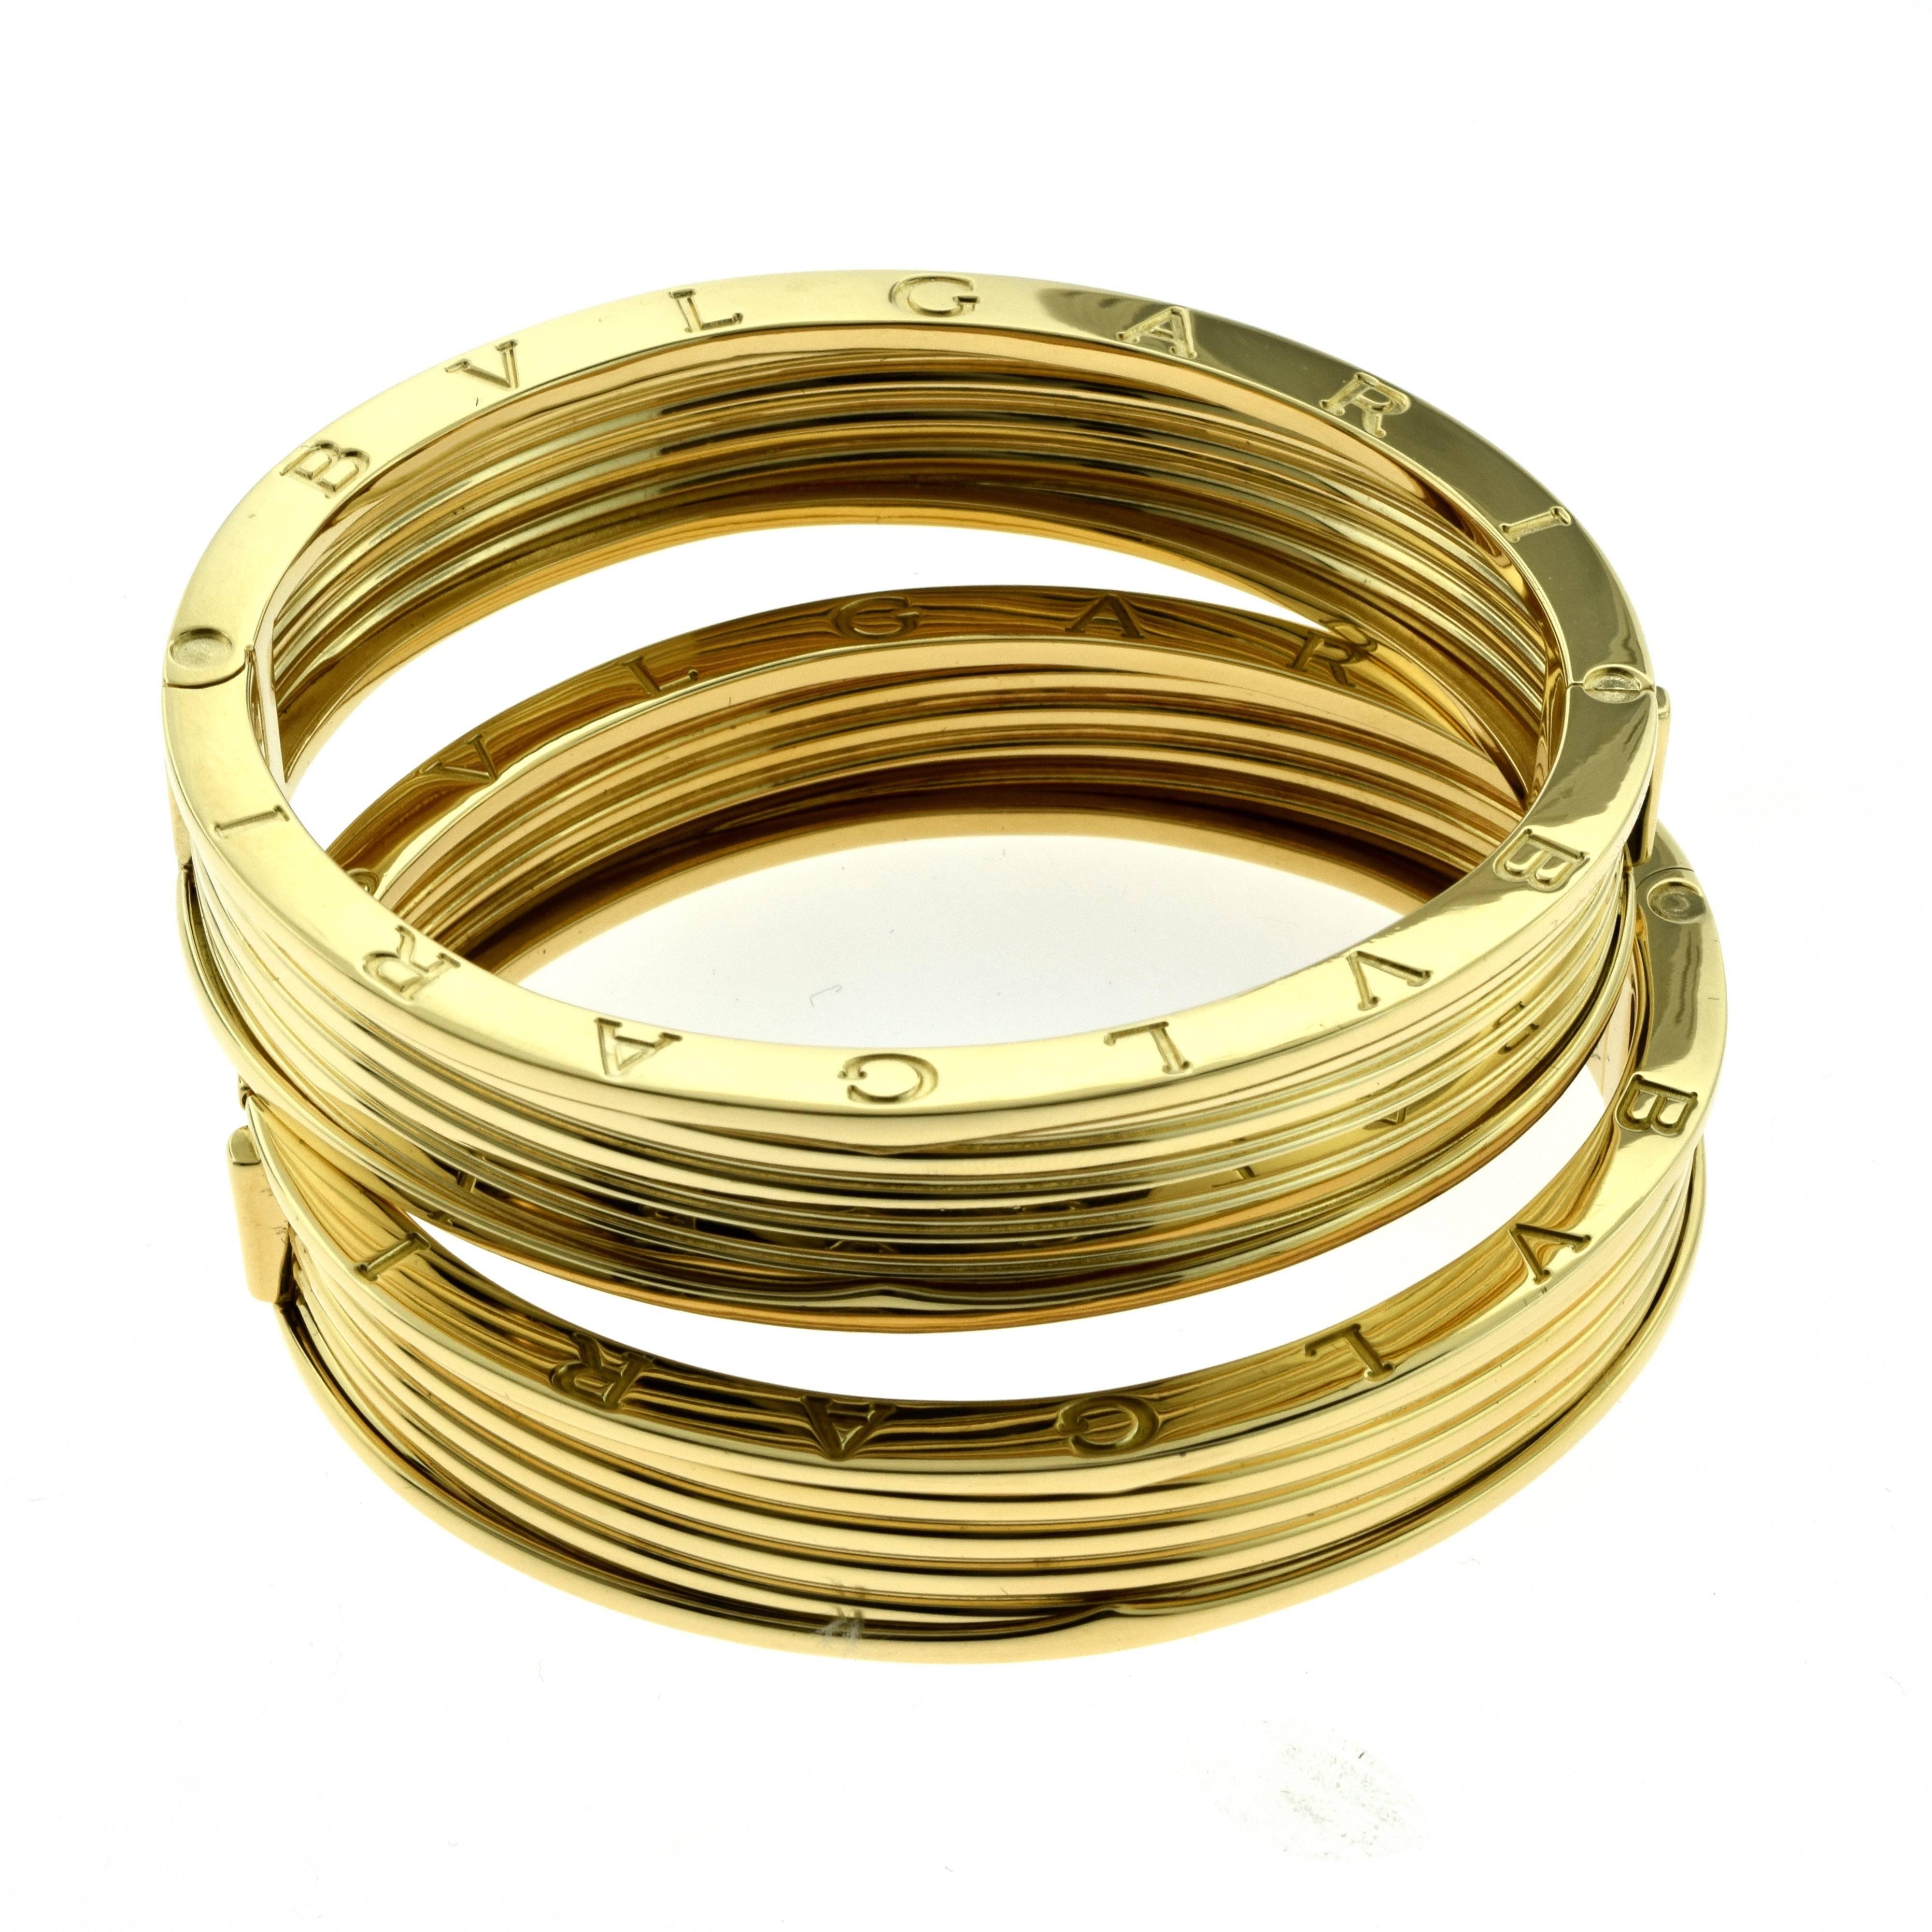 Type: 2 Large Wide Bangles
Hallmarks: BVLGARI Made in Italy 750 Serial Number

BRACELET 1
Total Item Weight (g): 84.0
Inner Measurement (North to South): 2.25 inches
Inner Measurement (East to West): 2.6 inches
Width: 0.59 inches

BRACELET 2
Total